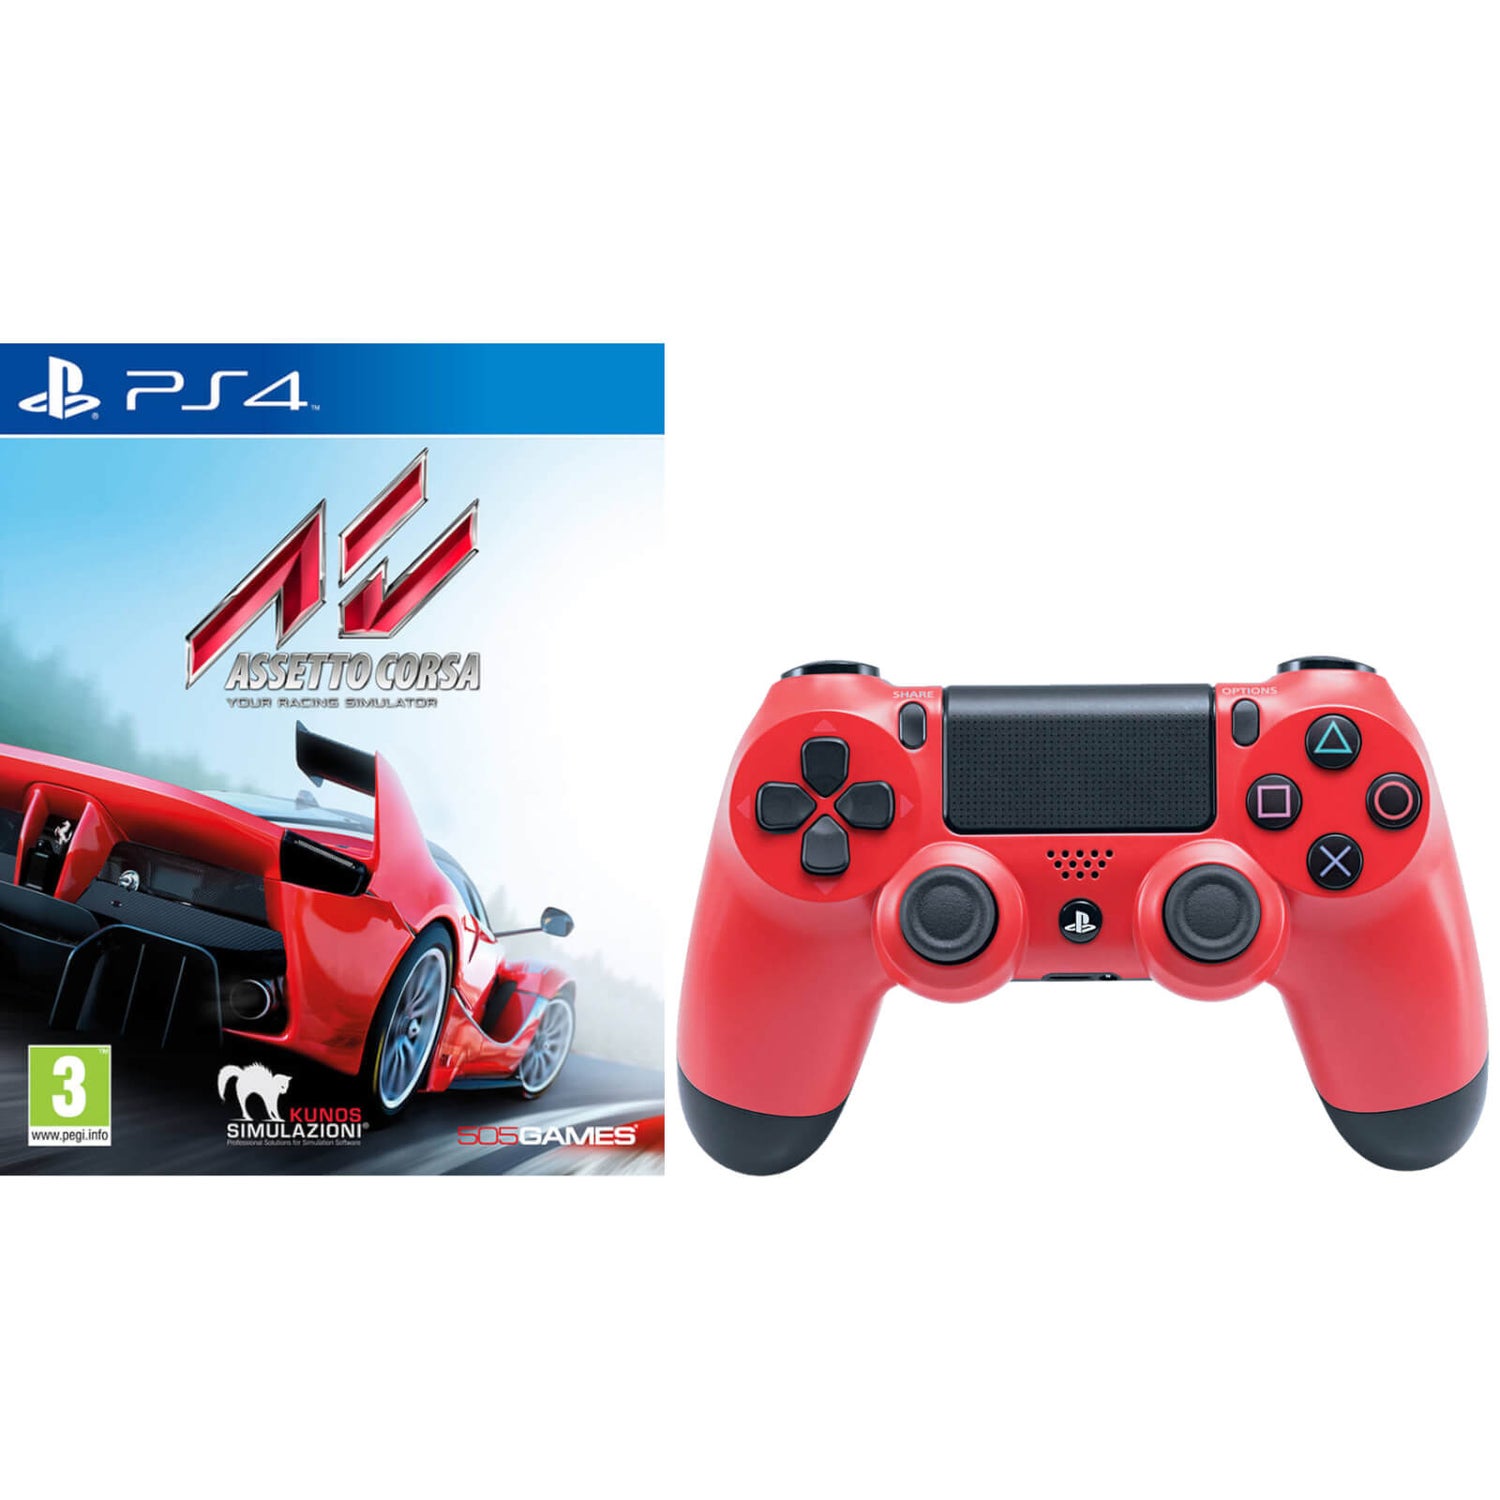 At blokere ægtefælle Sund mad Assetto Corsa with Sony PlayStation 4 DualShock 4 V2 Controller Red Games  Accessories - Zavvi US